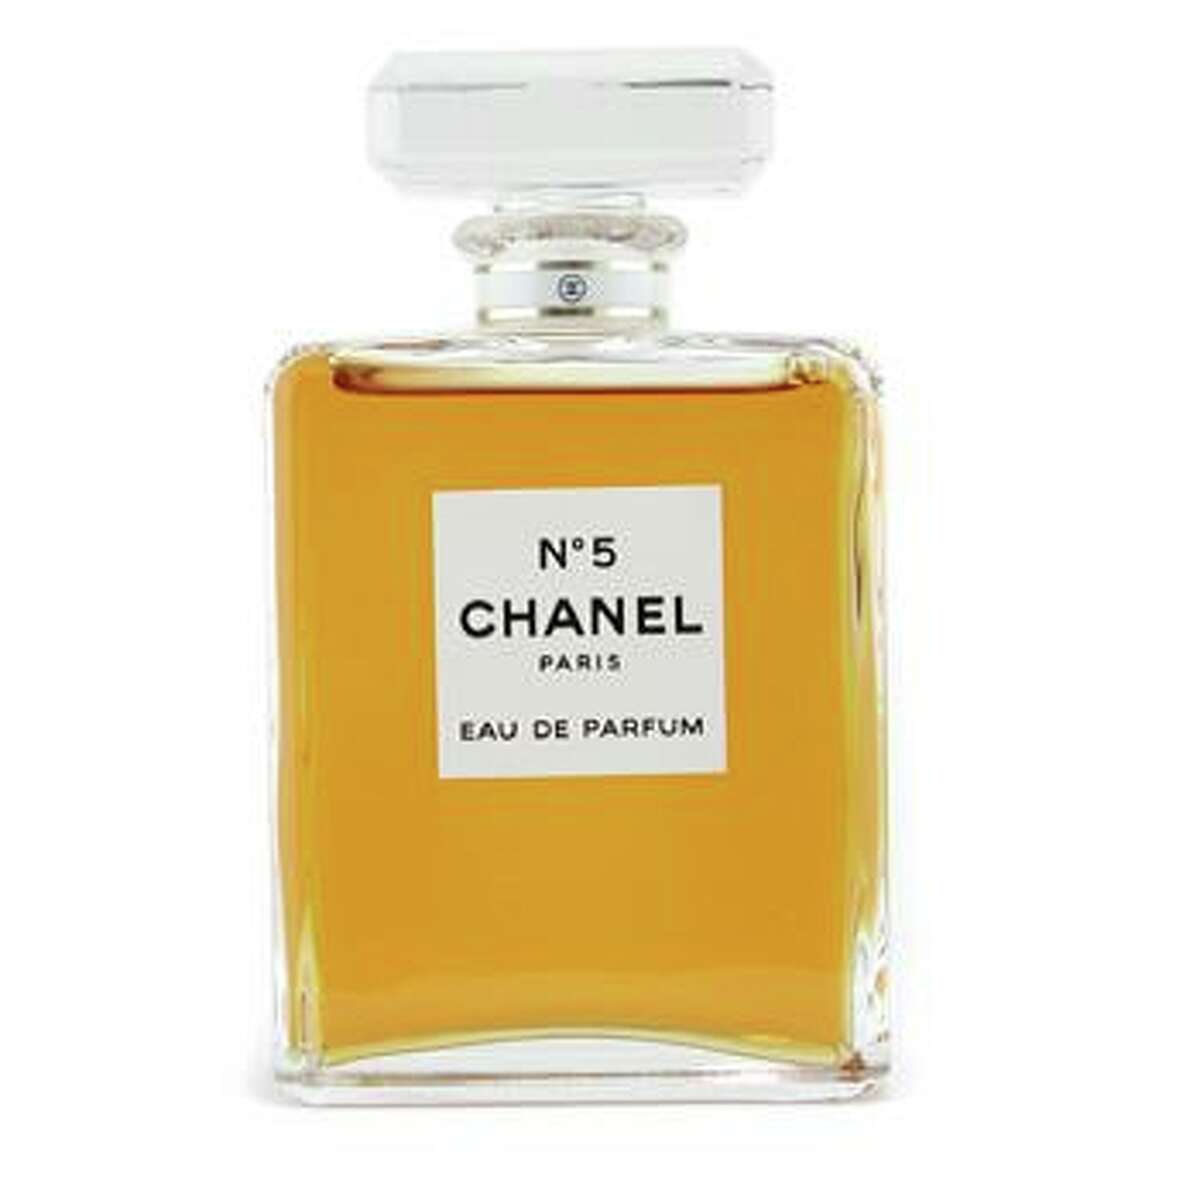 5 things to know about Chanel No. 5 on its 100 anniversary